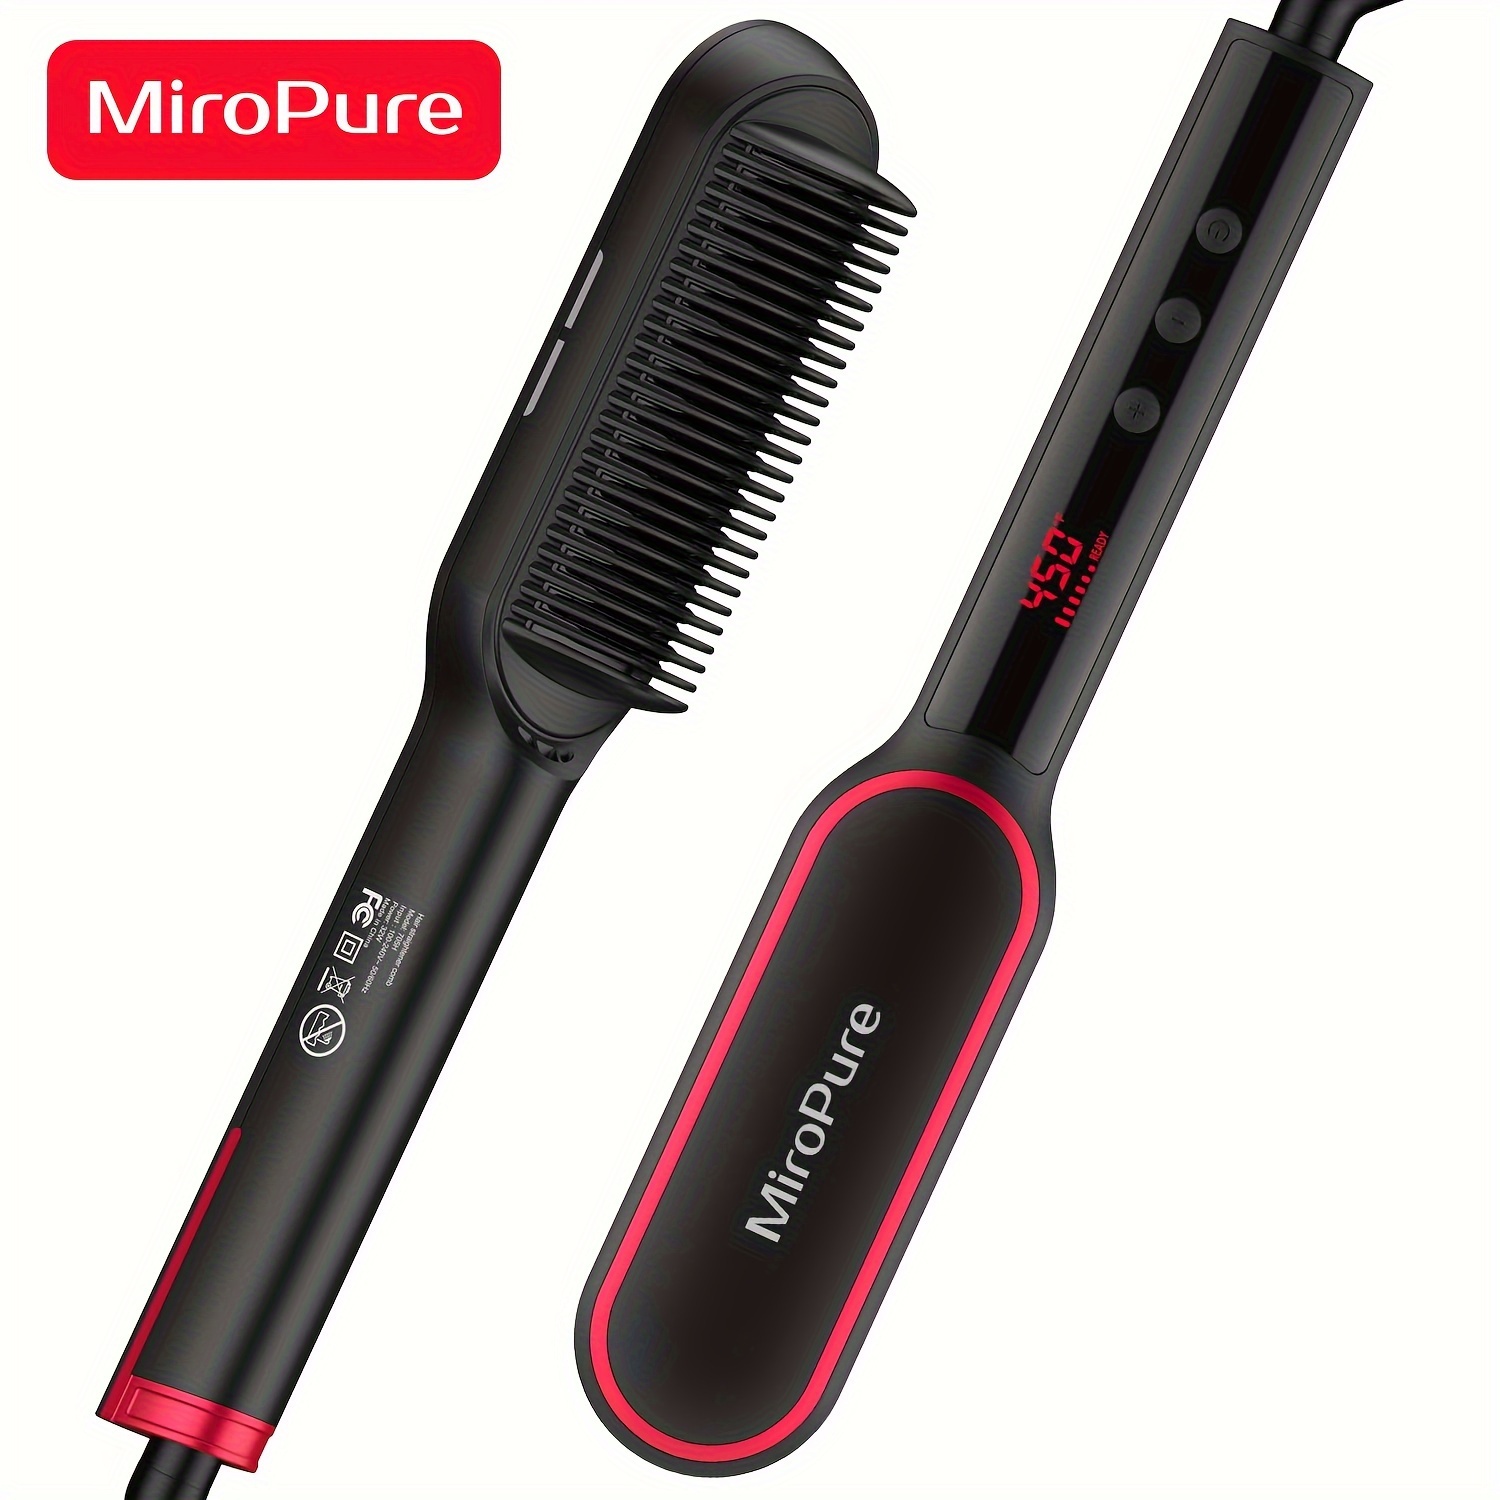 

Miropure Hair Straightener Brush, One-step Straightening Brush With 50m Negative Ions, 13 Temp Settings & Led Display, Dual Voltage, Straightening Comb With Anti-scald Design, Gifts For Women